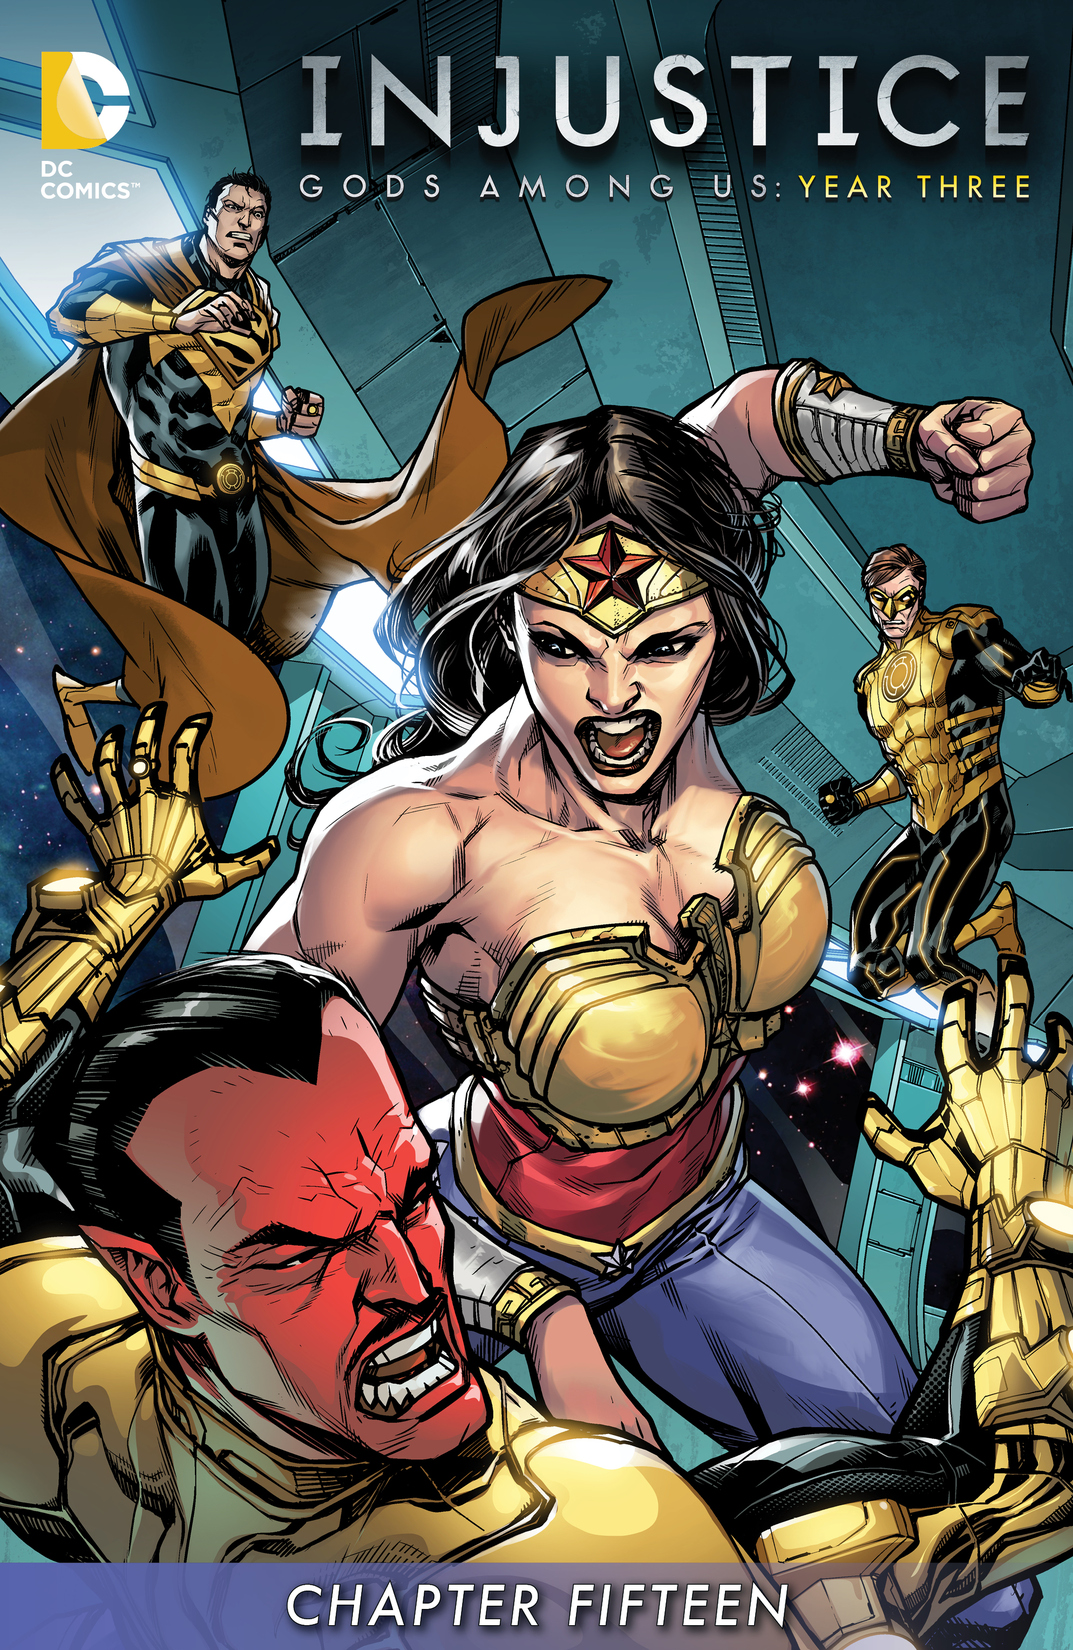 Injustice: Gods Among Us: Year Three #15 preview images